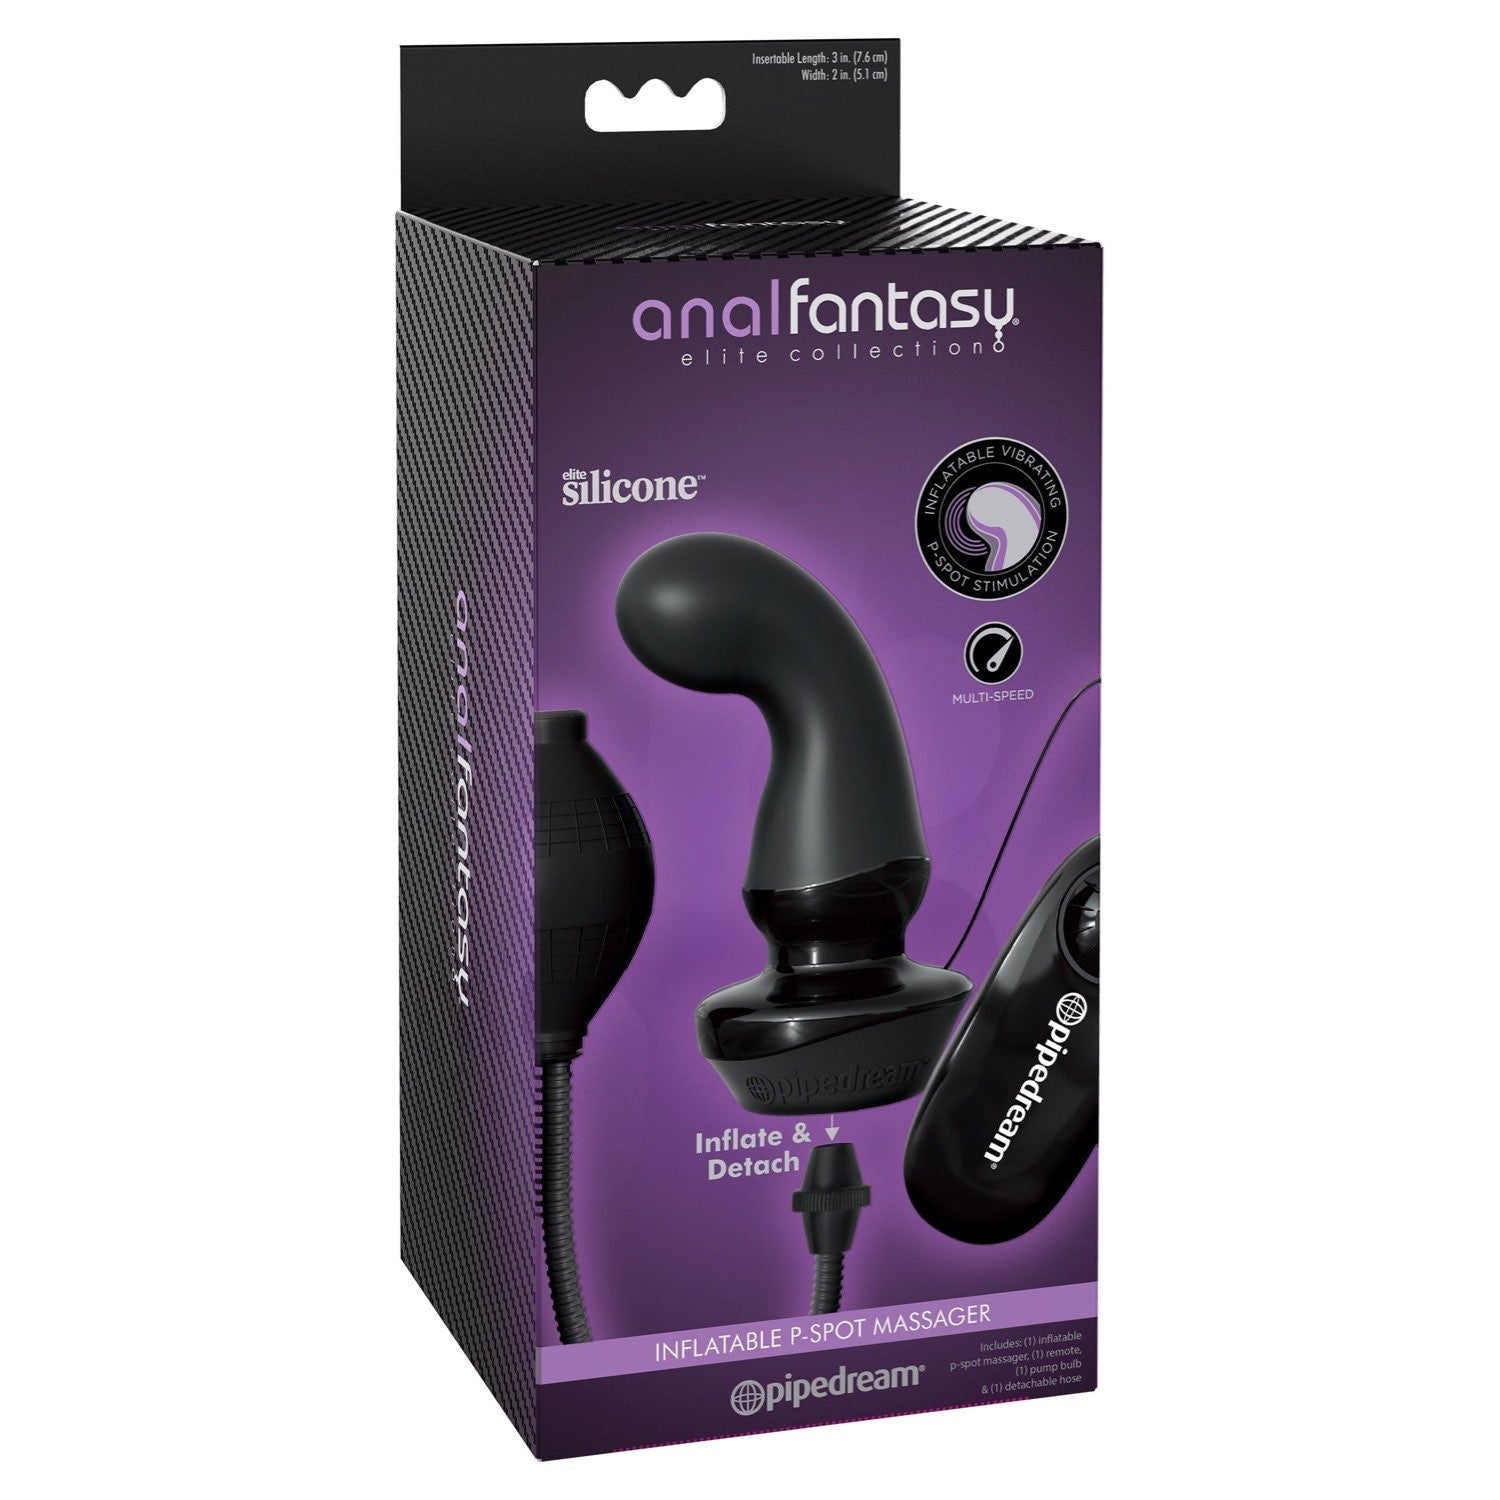 Anal Fantasy Elite Collection Inflatable P-Spot Massager - Black 12.4 cm (4.9&quot;) Inflatable Vibrating Prostate Massager by Pipedream